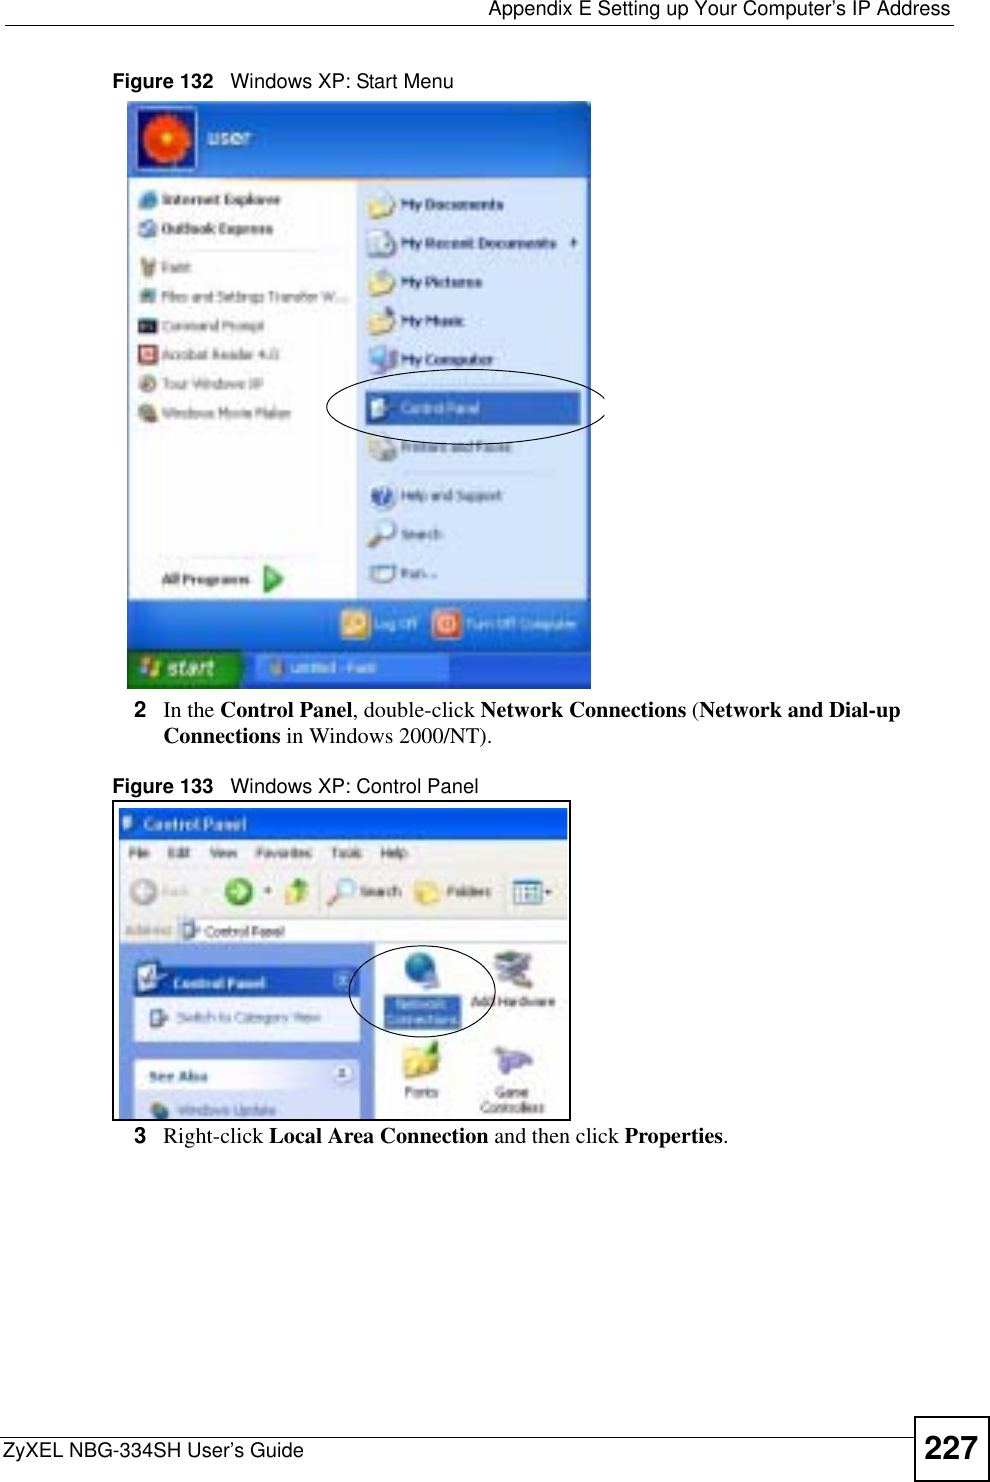  Appendix E Setting up Your Computer’s IP AddressZyXEL NBG-334SH User’s Guide 227Figure 132   Windows XP: Start Menu2In the Control Panel, double-click Network Connections (Network and Dial-up Connections in Windows 2000/NT).Figure 133   Windows XP: Control Panel3Right-click Local Area Connection and then click Properties.